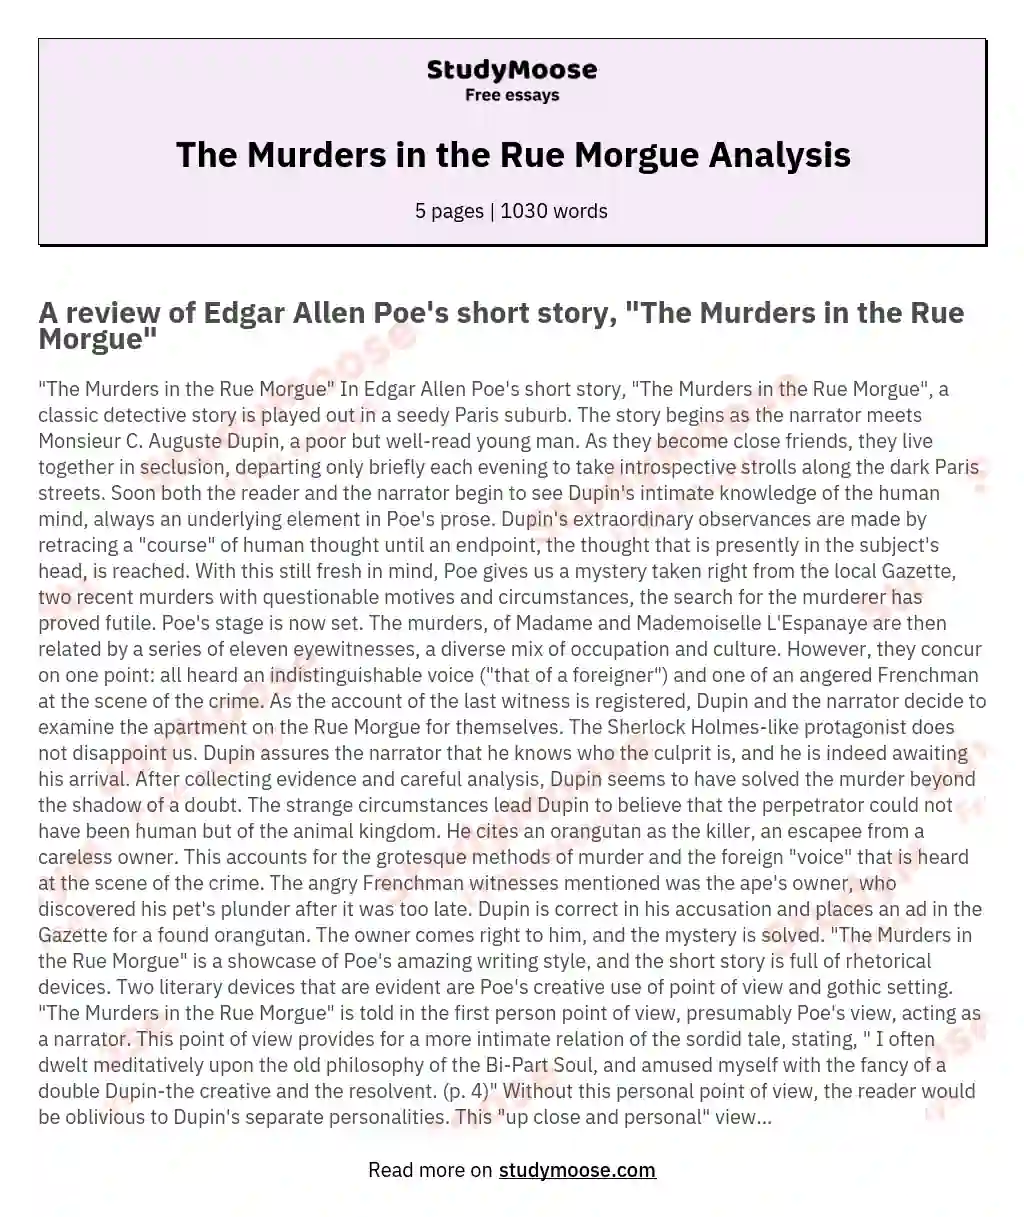 The Murders in the Rue Morgue Analysis essay